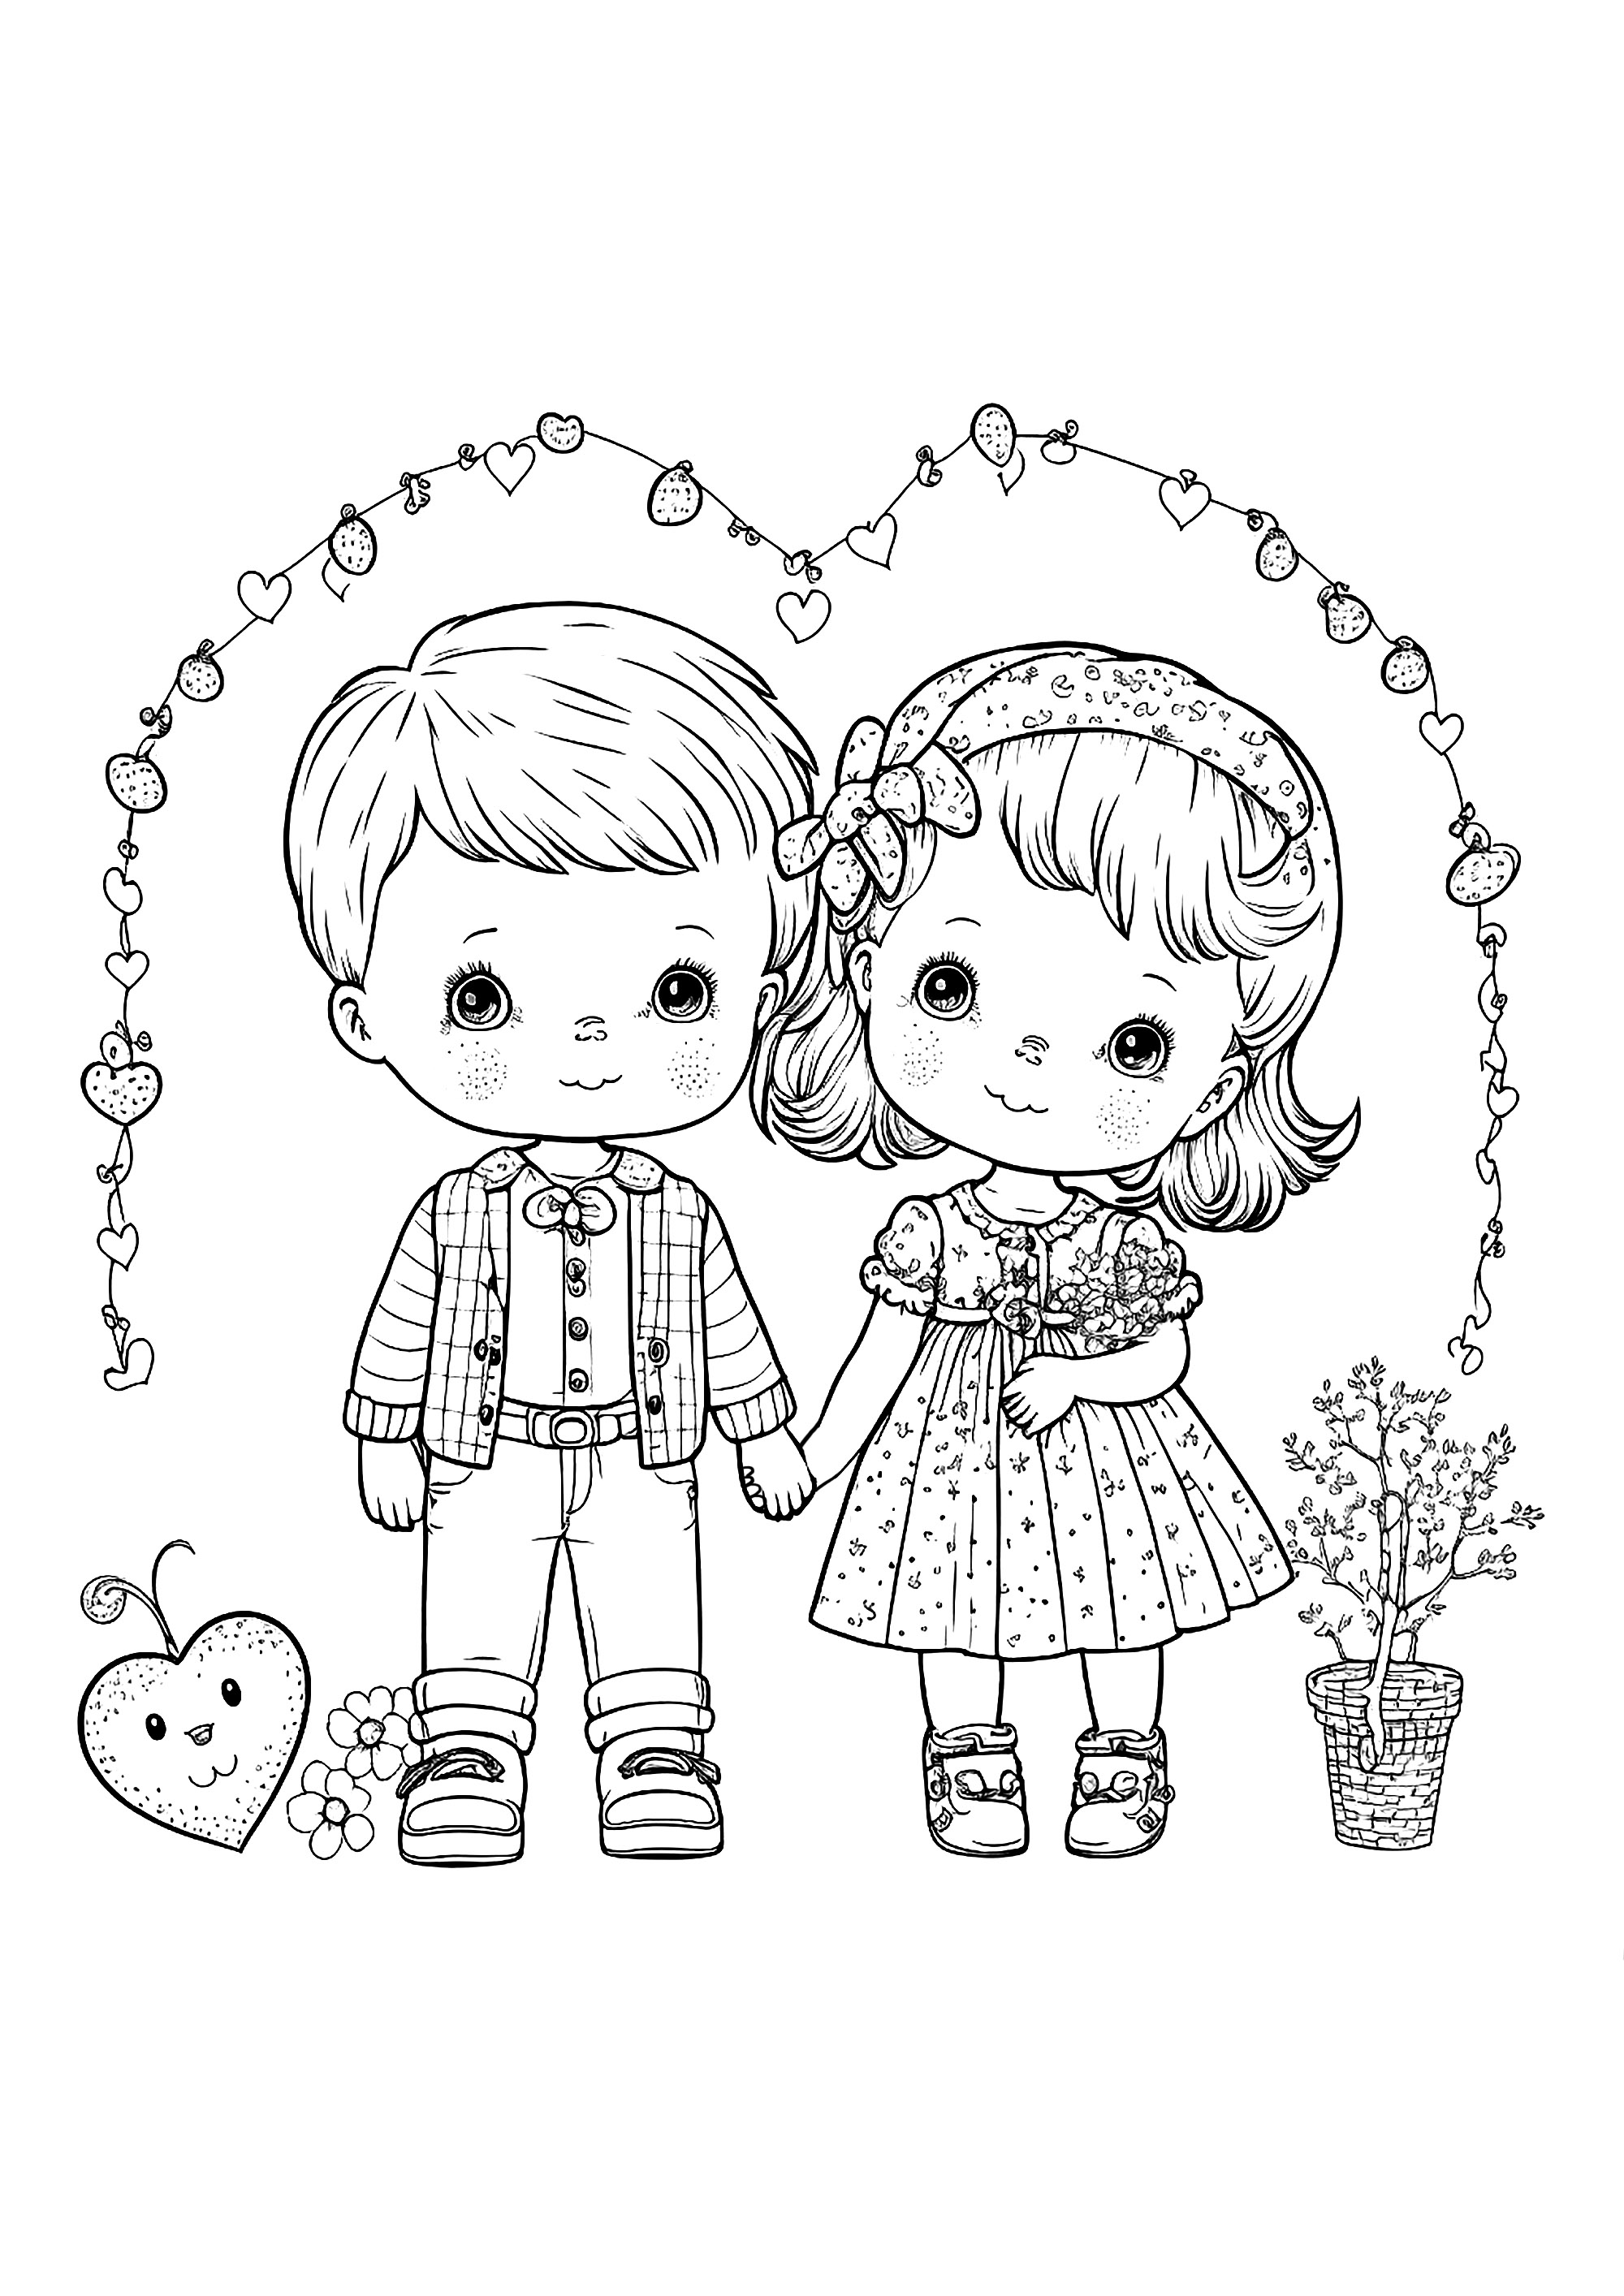 Two little lovers to color, in a very touching Valentine's Day coloring page. The scene is very touching and gives off an atmosphere of happiness and joy. Children can have fun coloring this very romantic coloring, choosing their favorite colors. They will be able to bring these two little lovers to life and imagine their adventures.